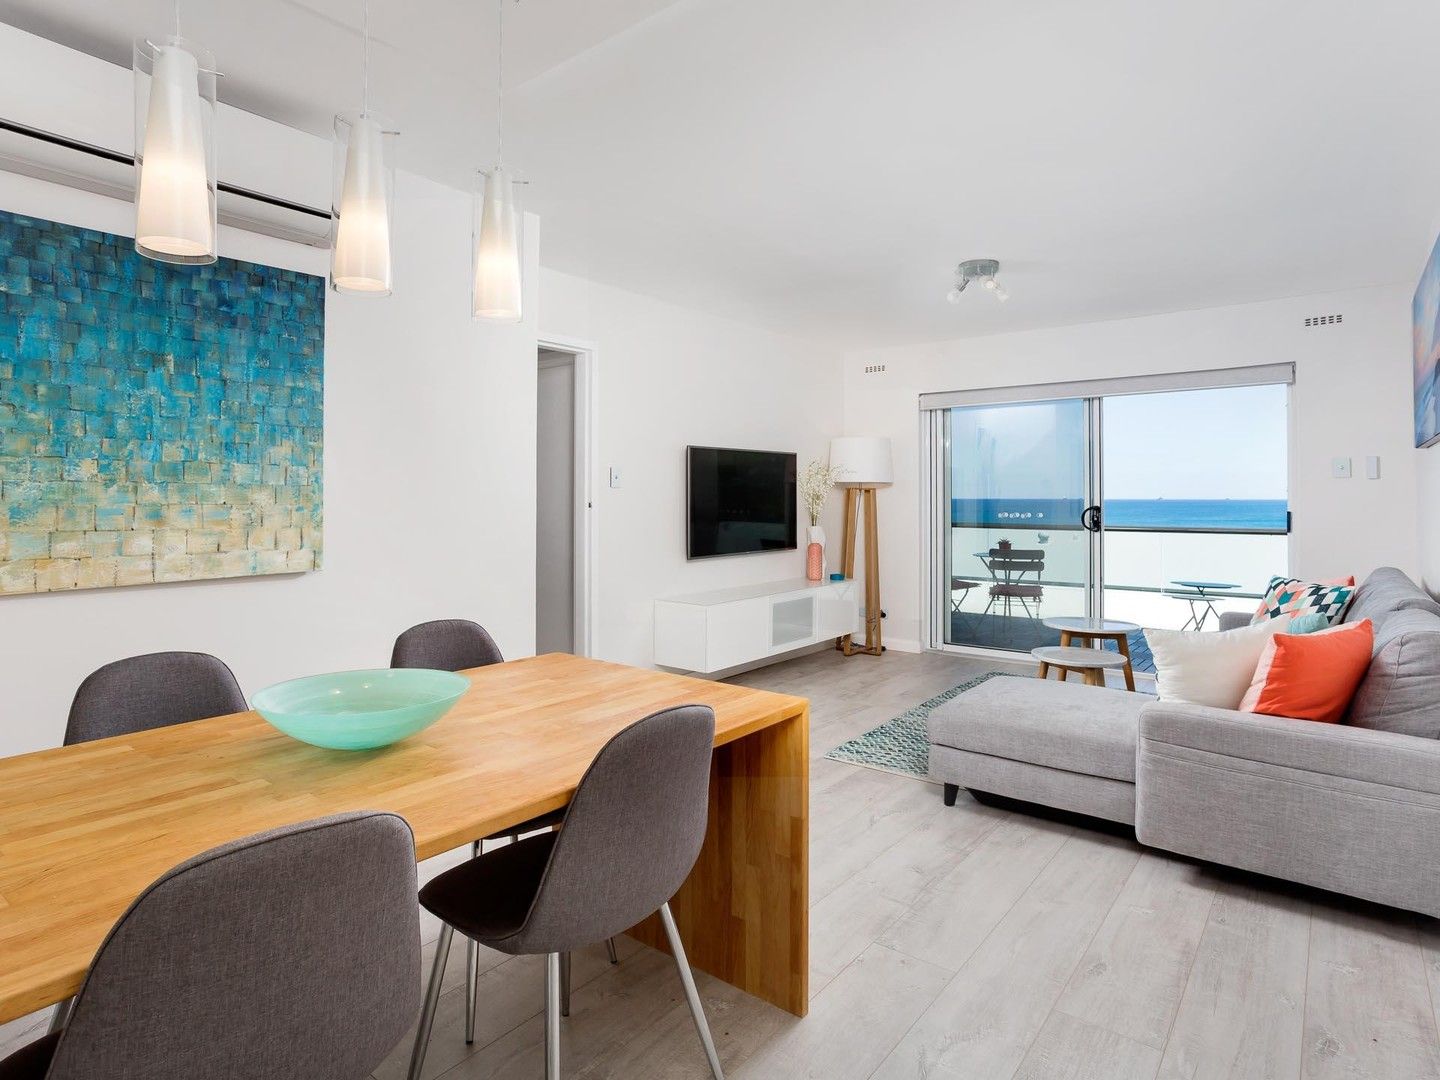 2 bedrooms Apartment / Unit / Flat in 18/34 Marine Parade COTTESLOE WA, 6011